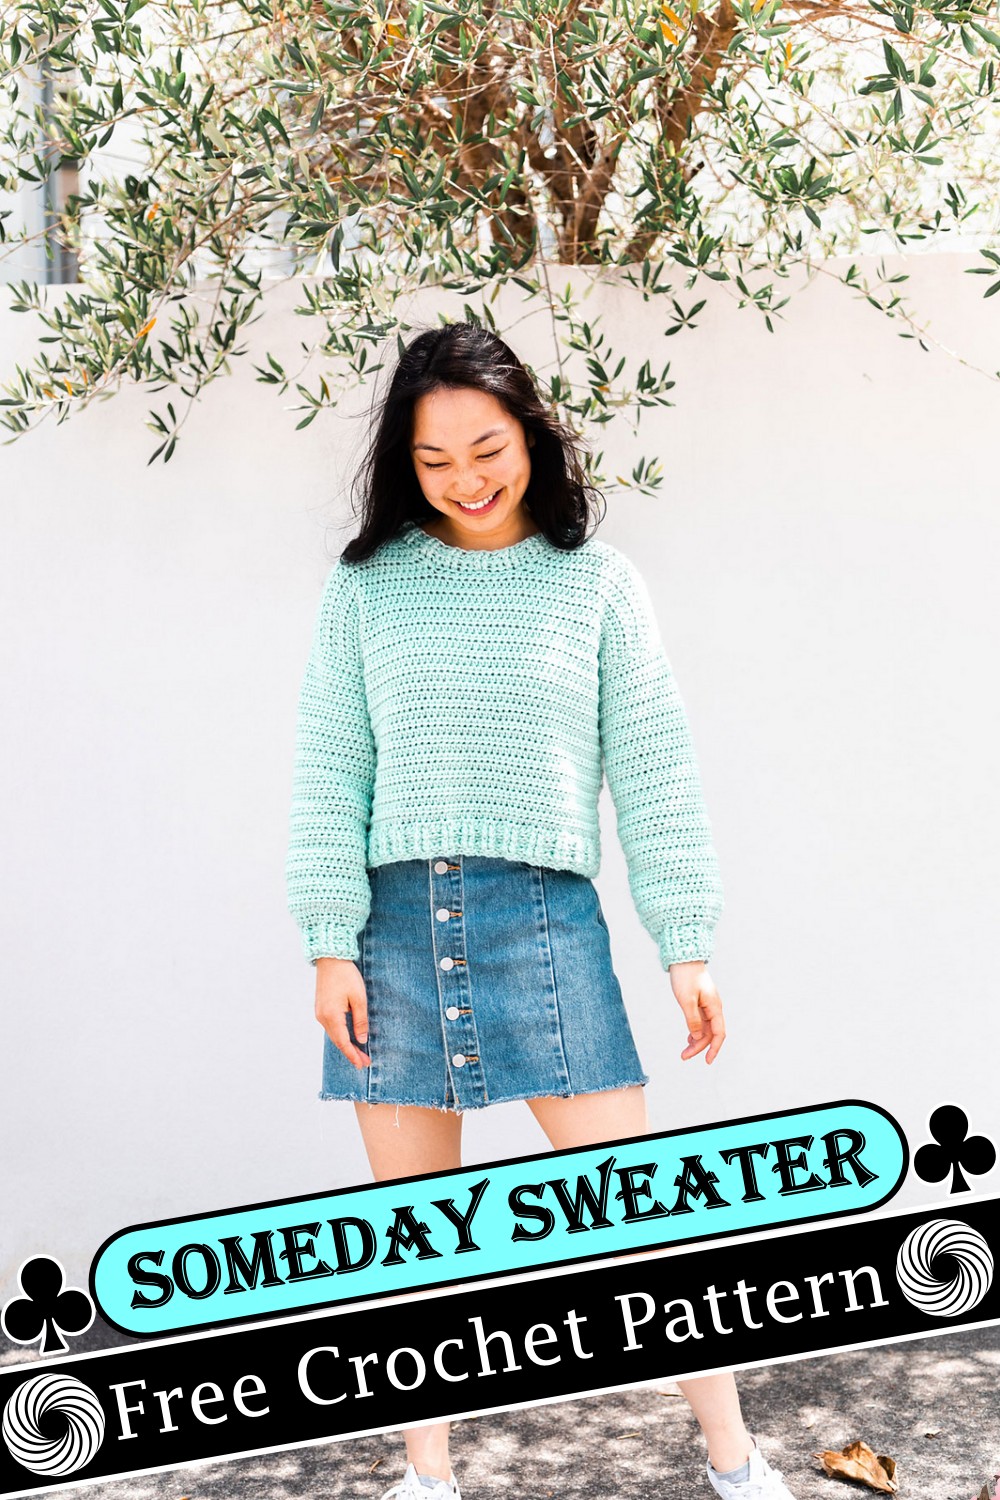 Someday Sweater